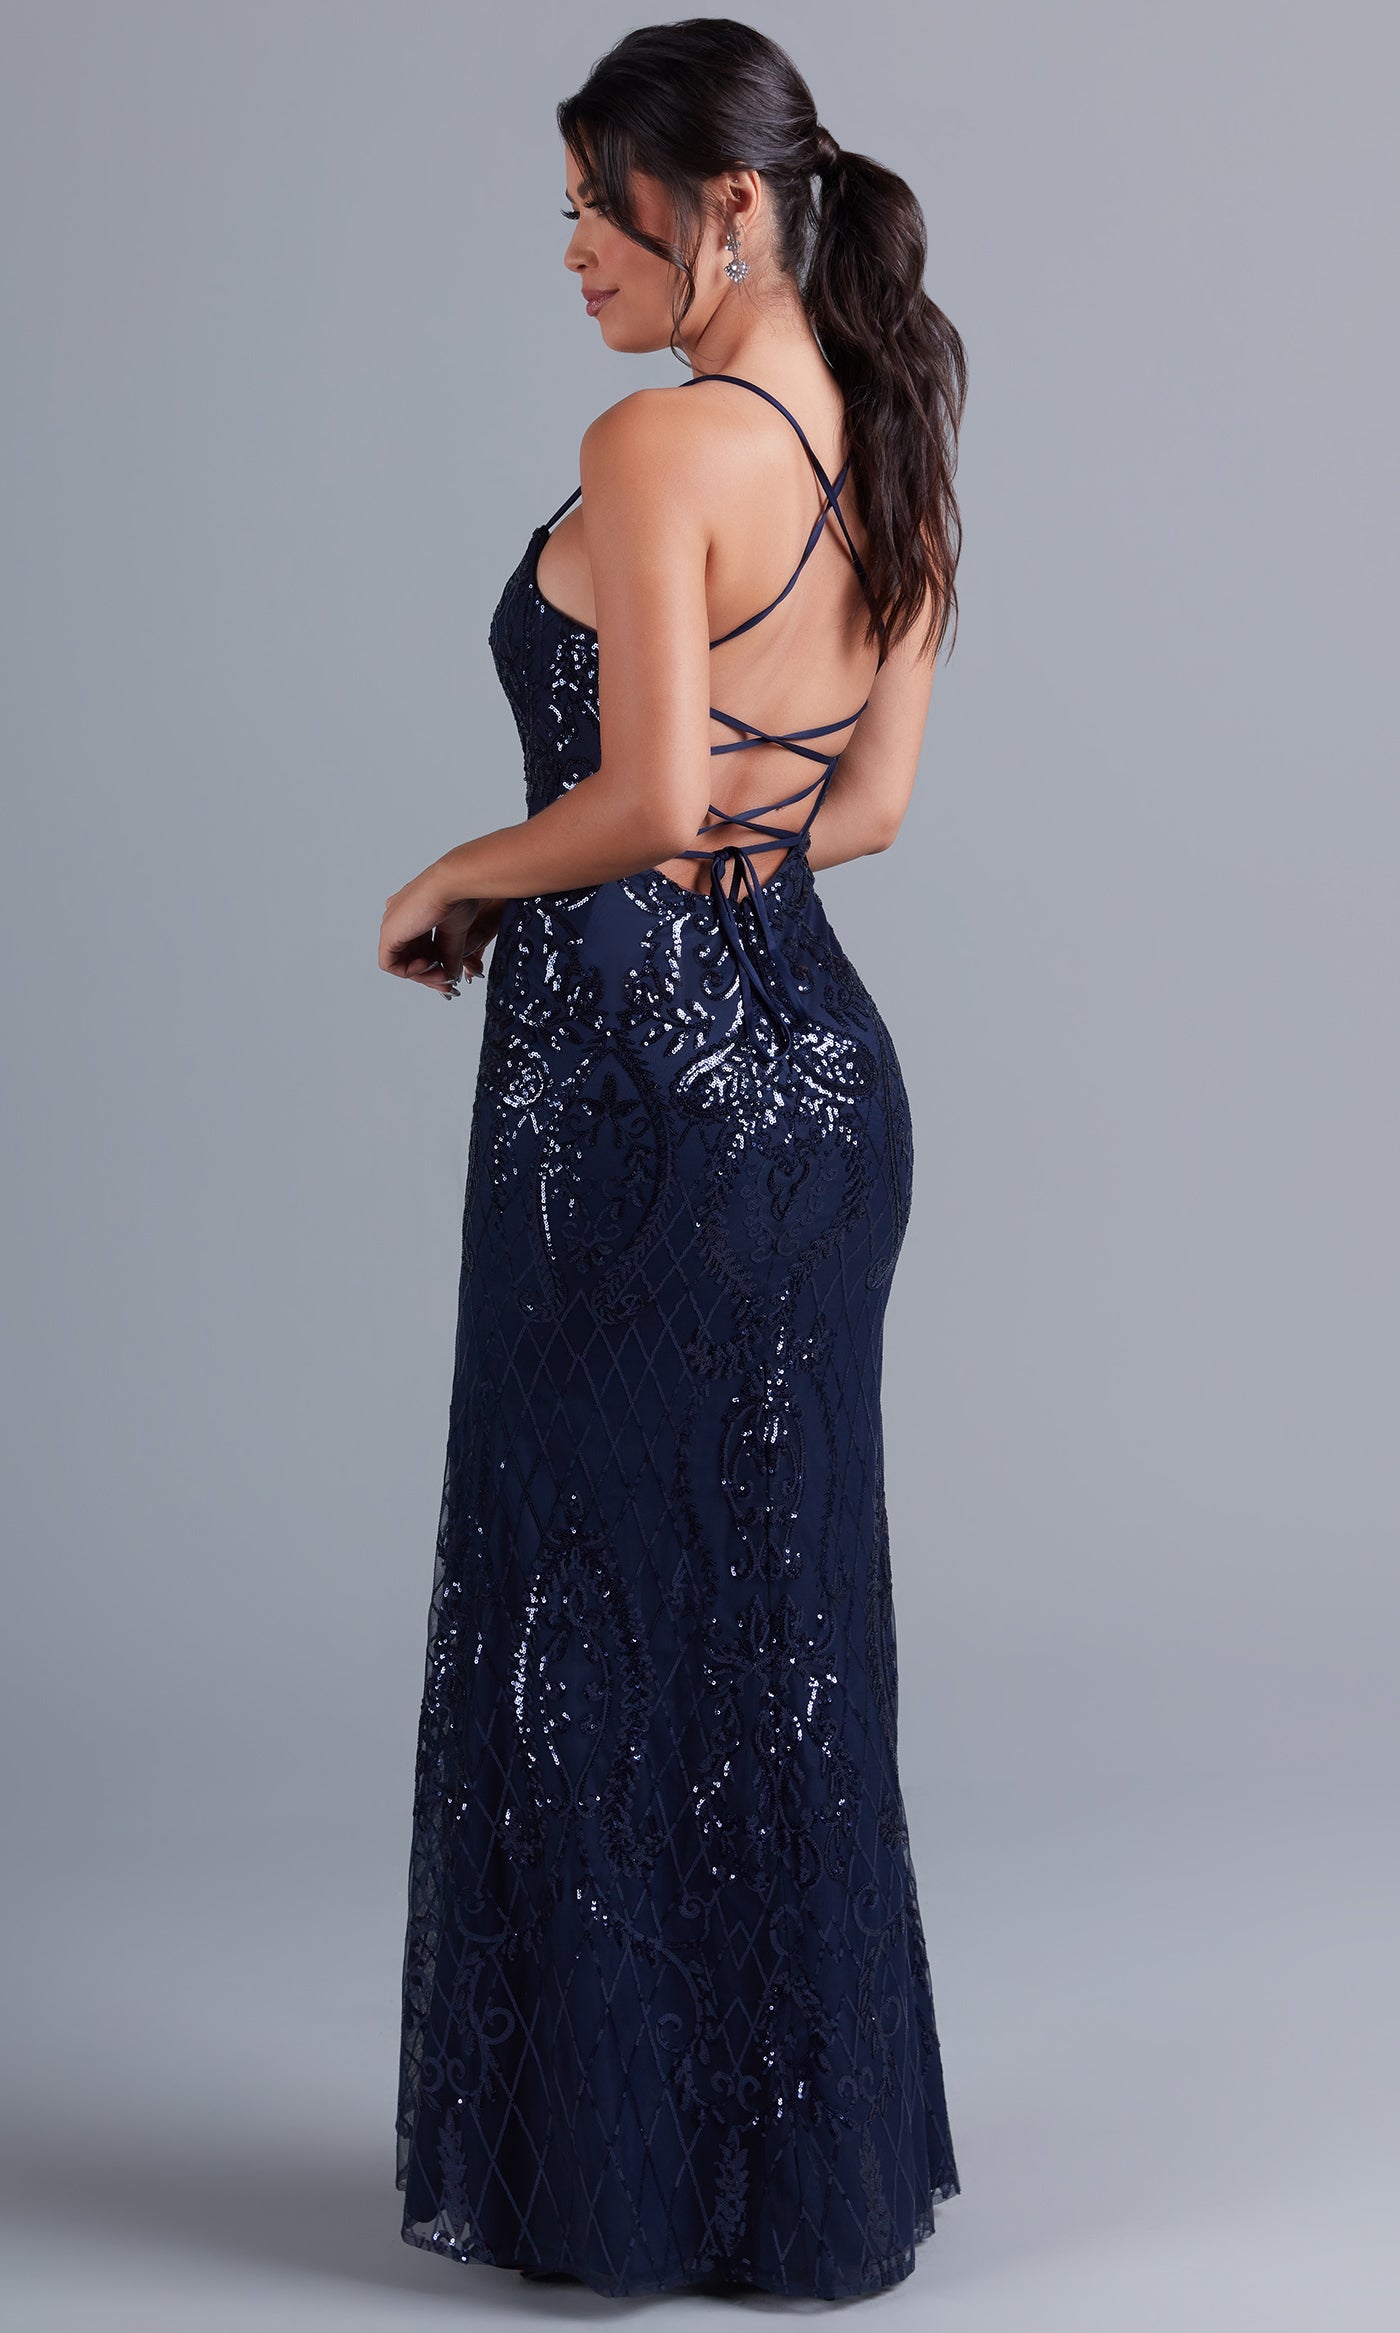  Sequin-Print Long Formal Dress with Statement Back